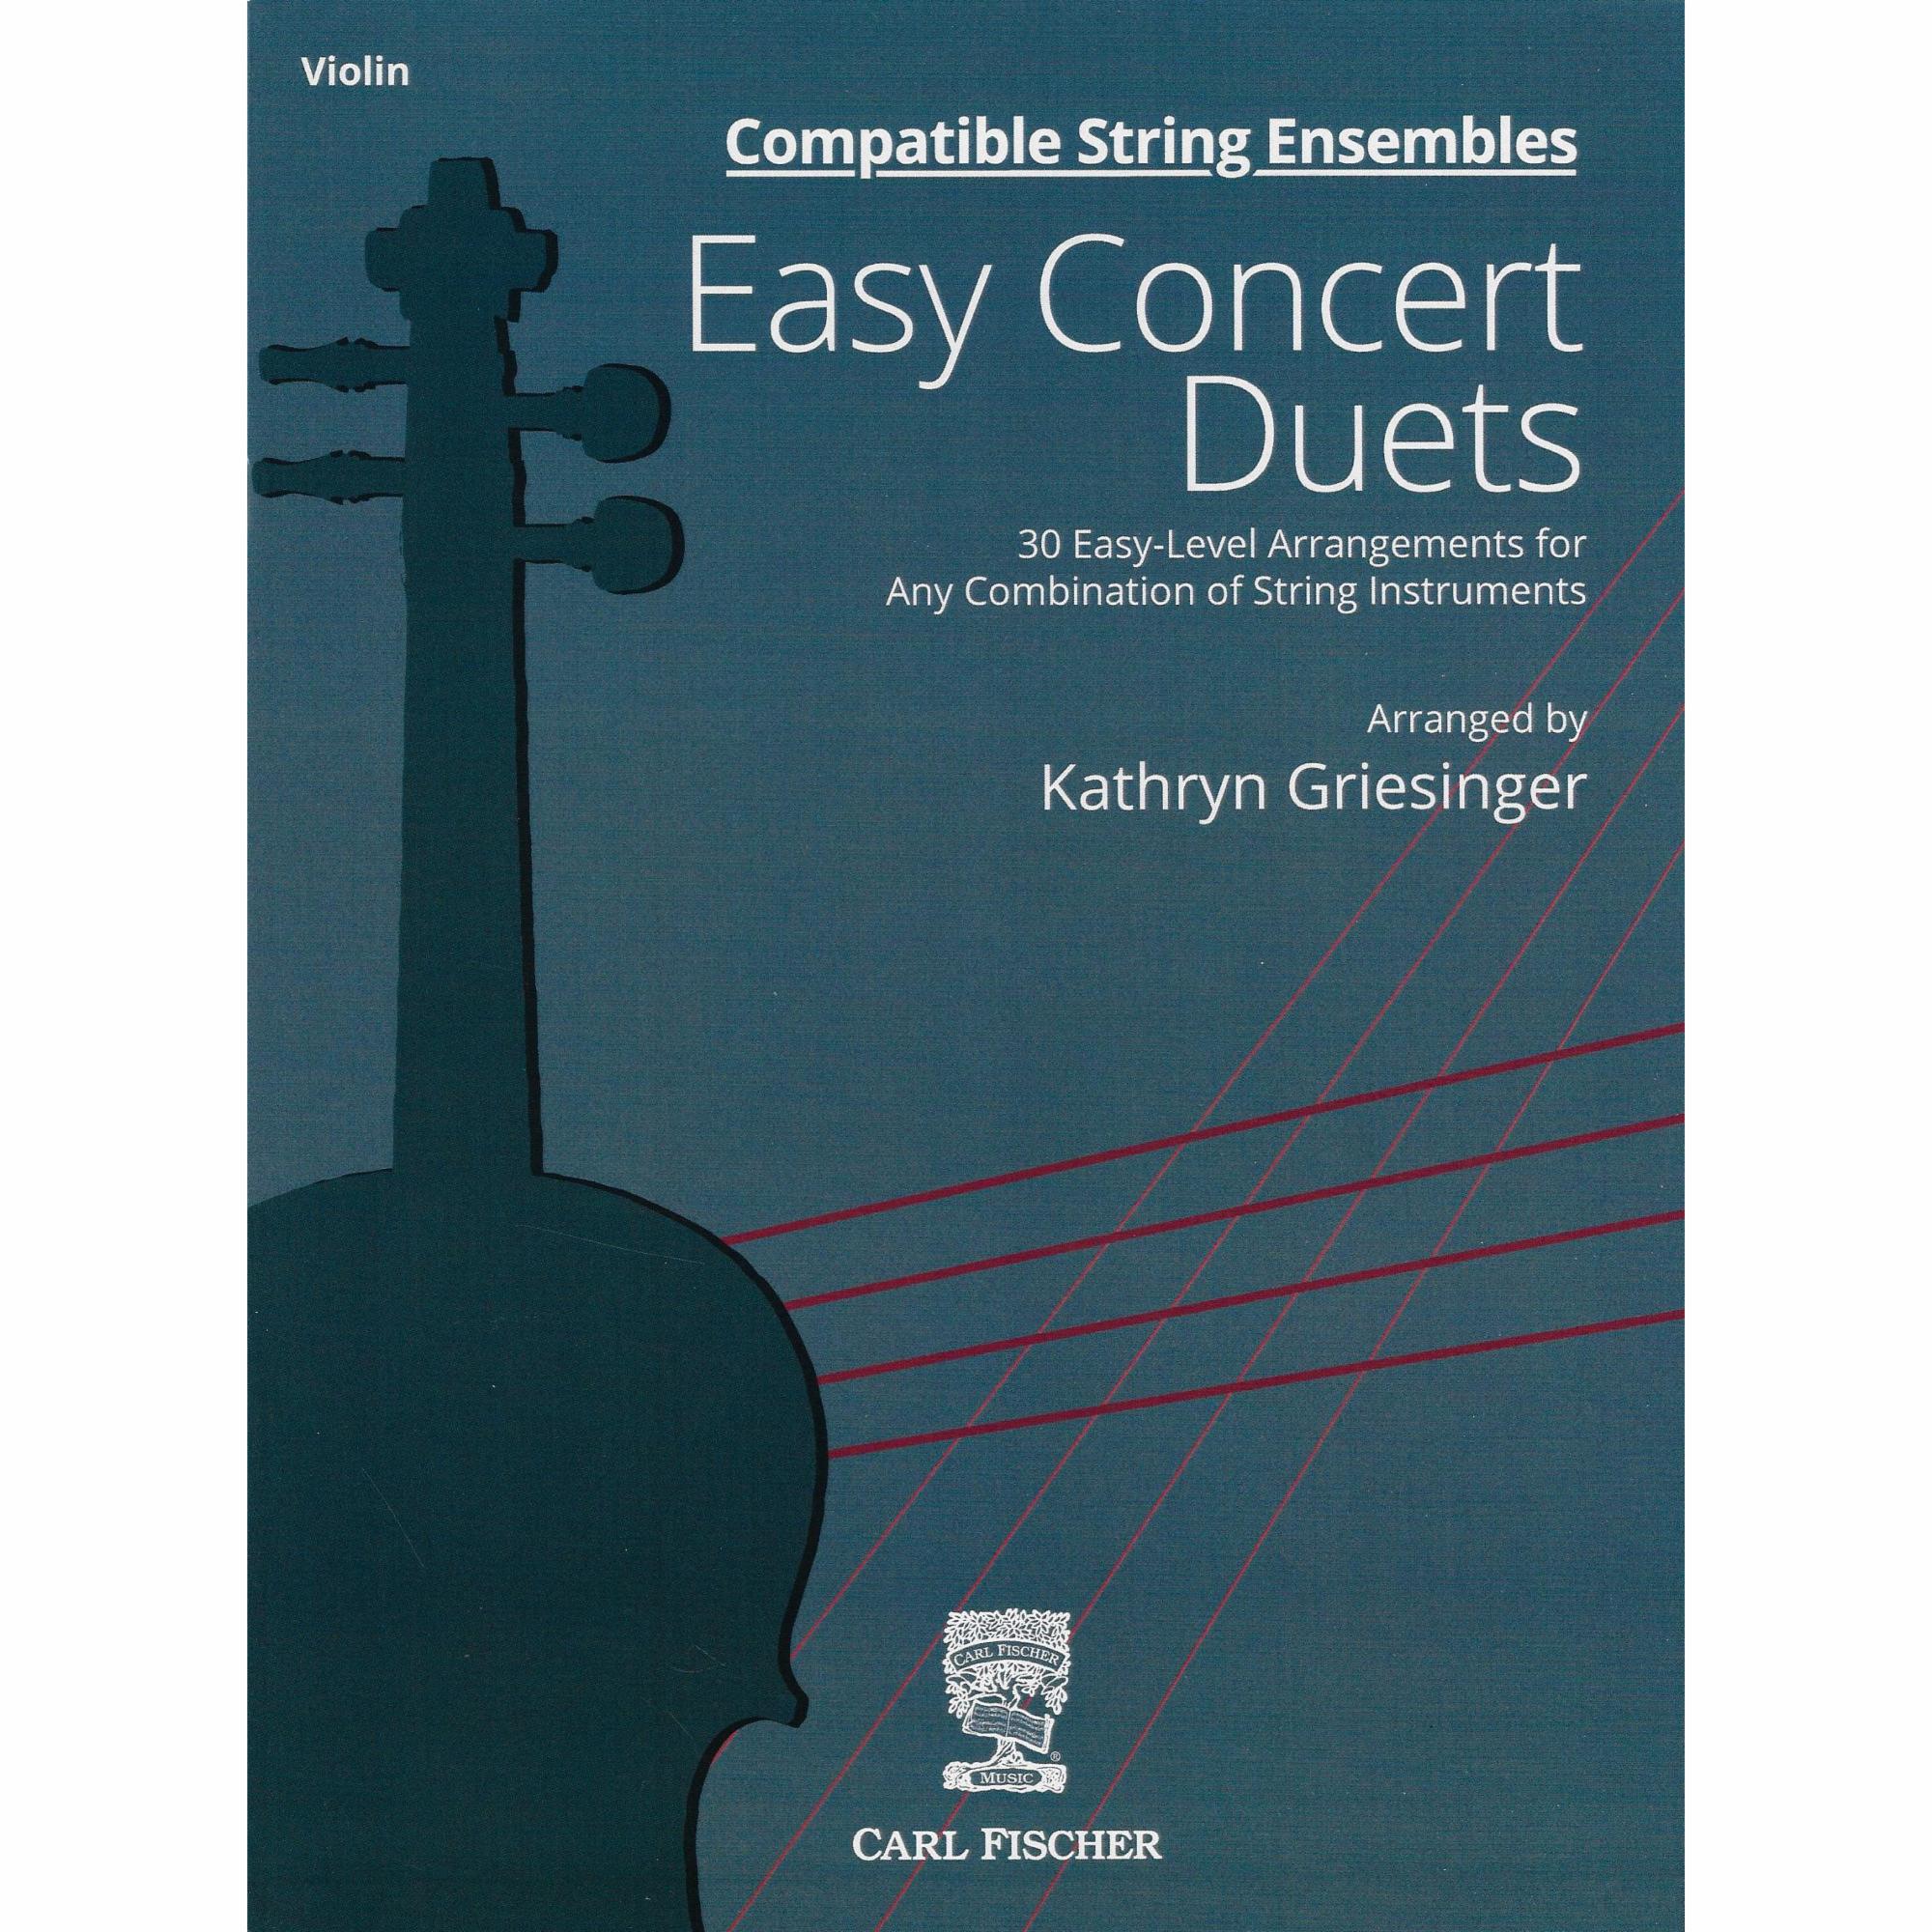 Easy Concert Duets for Violin, Viola, Cello or Bass